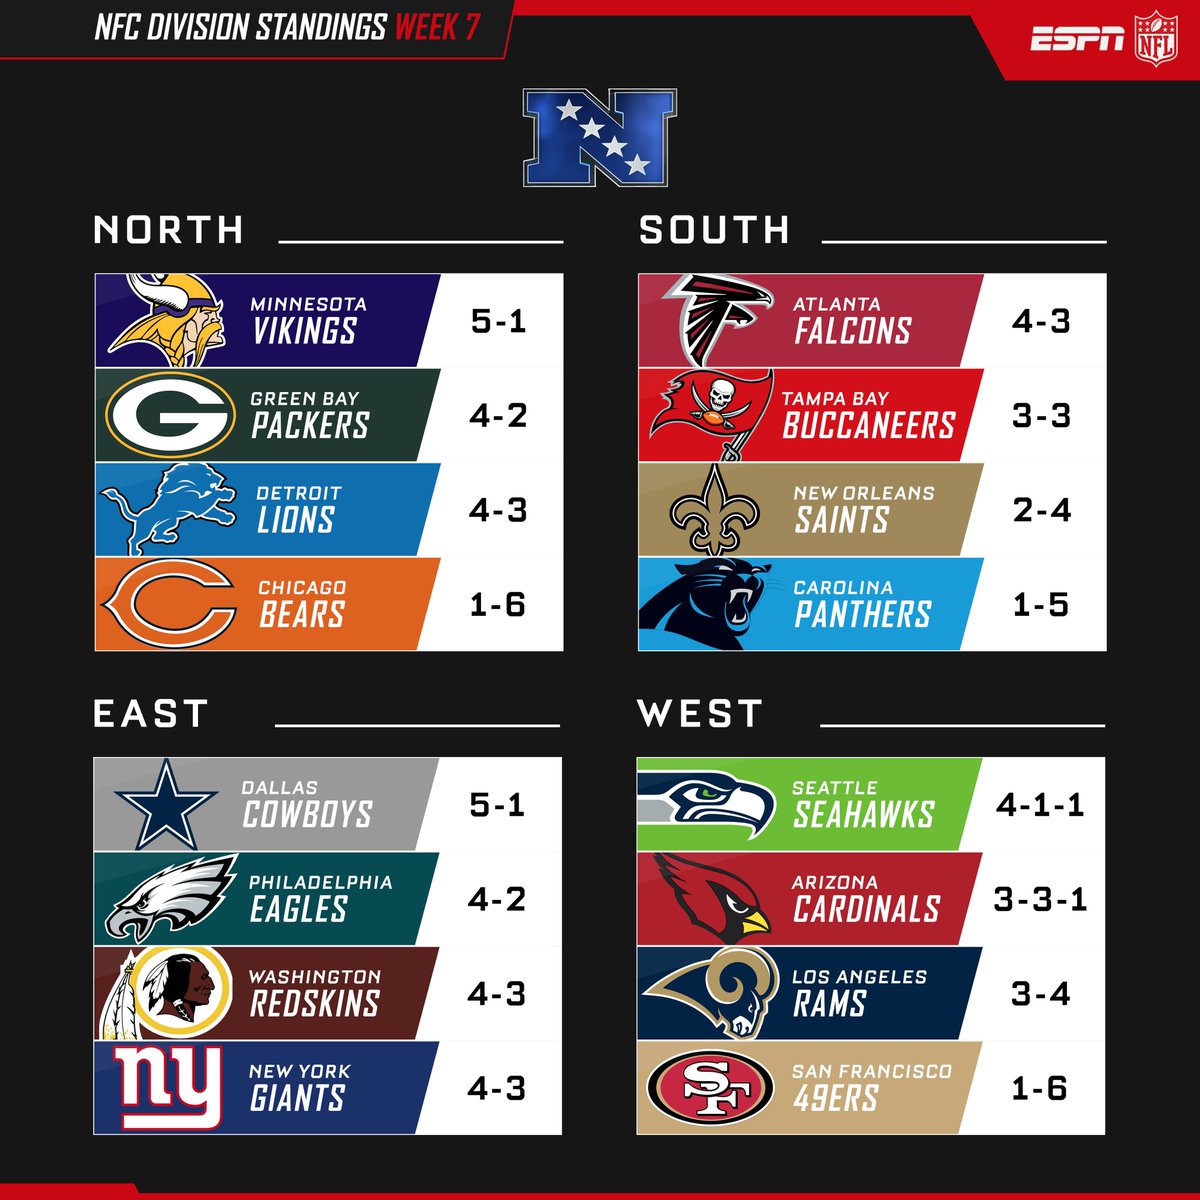 Here S How The Nfc Division Standings Look After Week Nfl On Espn My